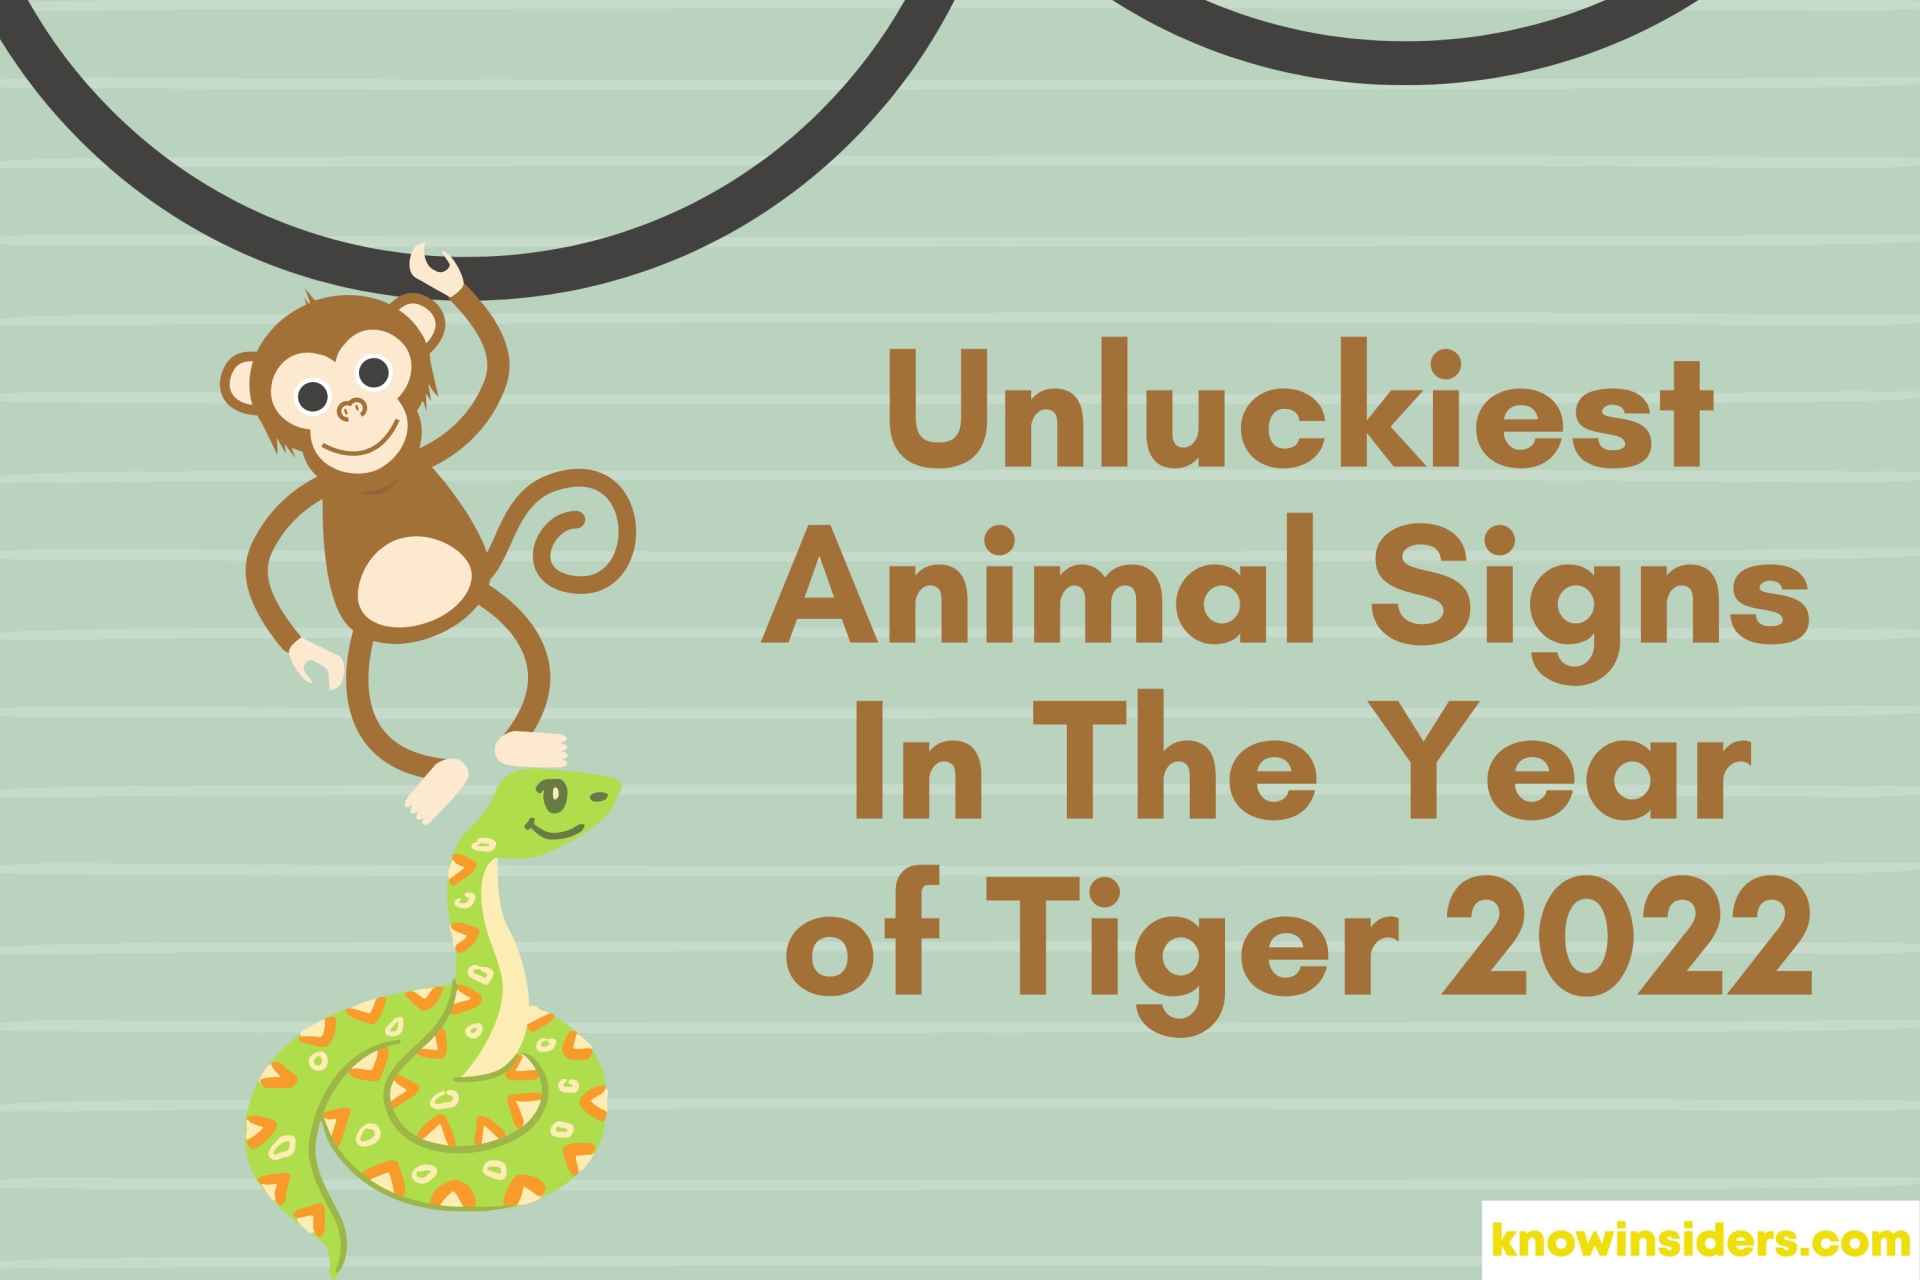 Two Unluckiest Animal Signs In The Year of Tiger 2022 – Snake and Monkey